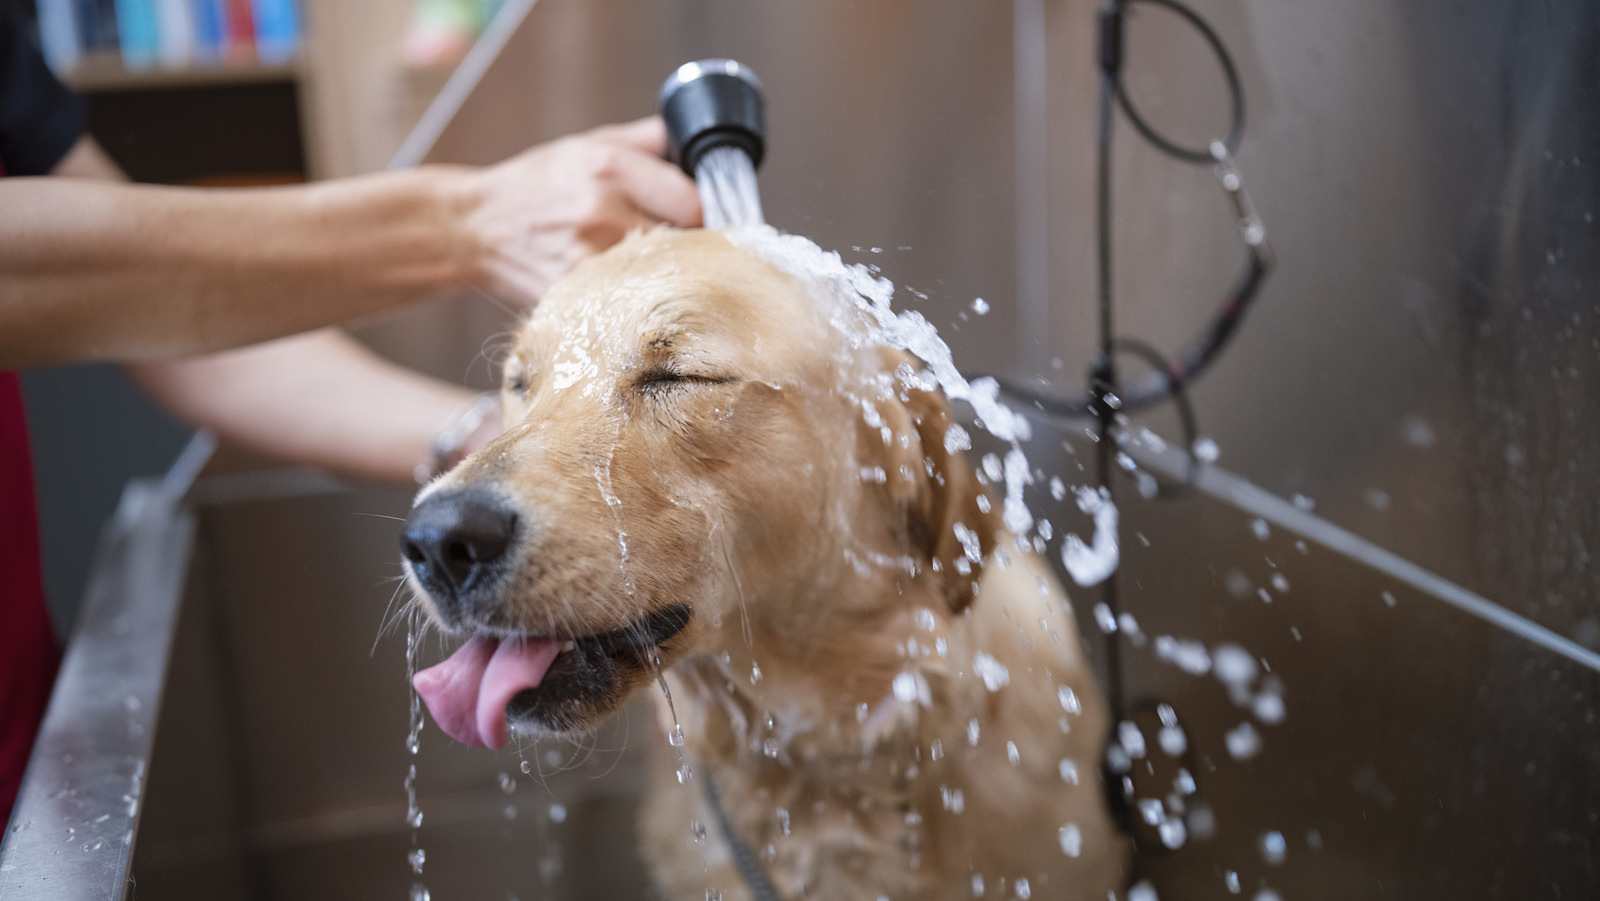 https://www.housedigest.com/img/gallery/must-haves-for-the-perfect-pet-shower-in-your-home/l-intro-1696024024.jpg